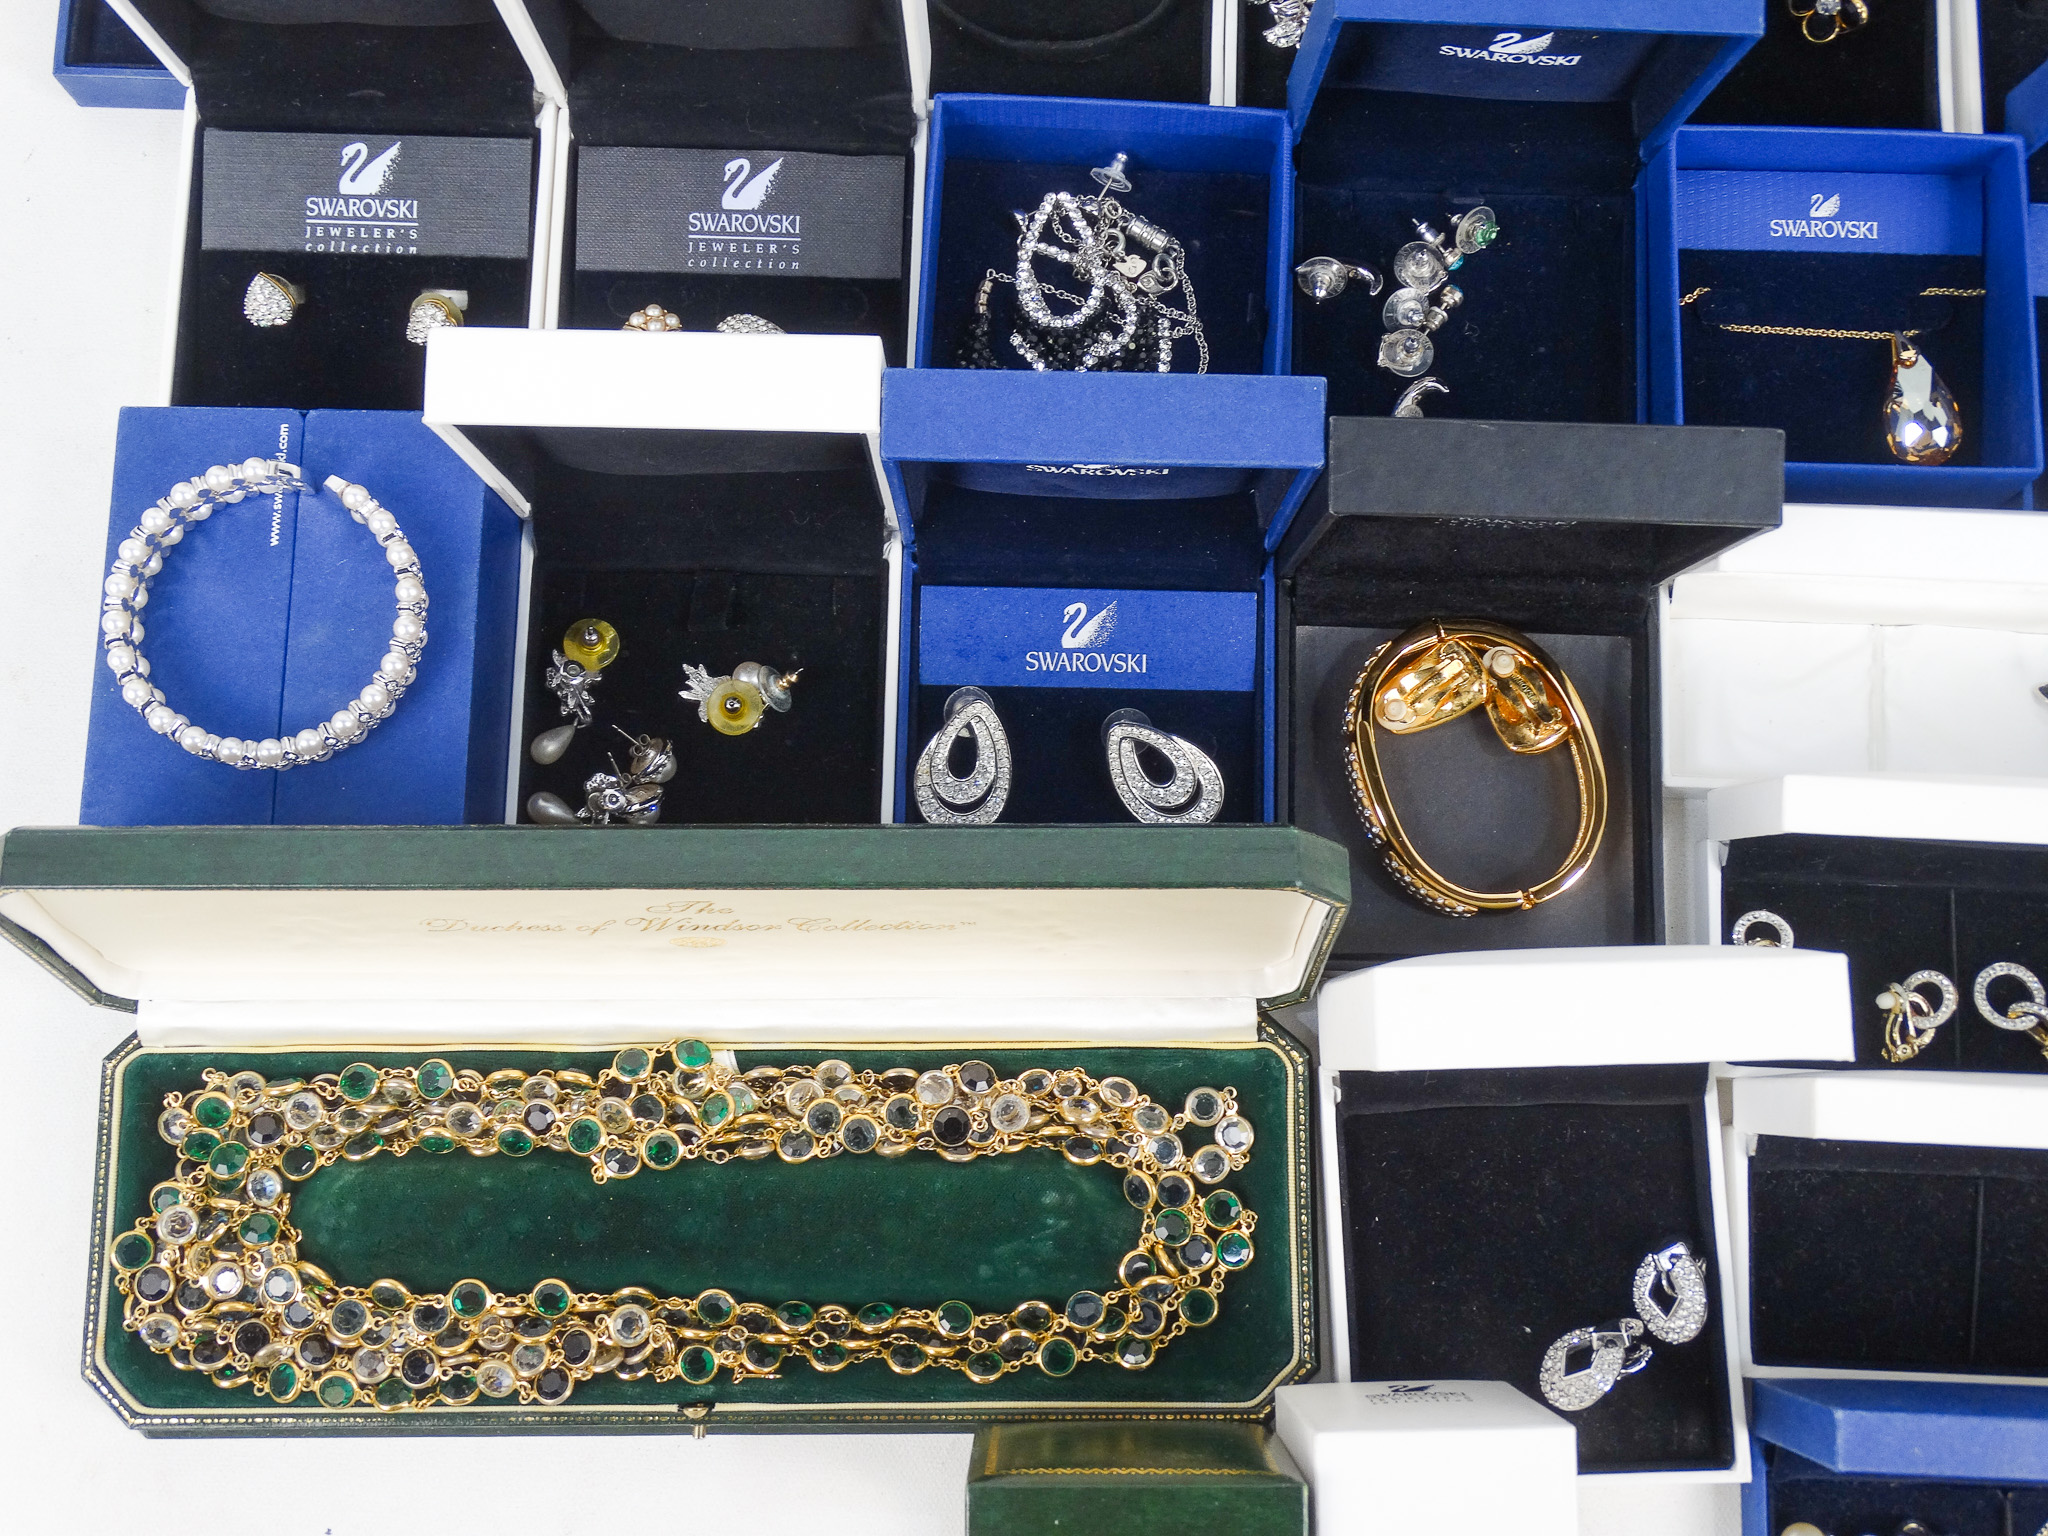 A quantity of Swarovski costume jewellery - many items with original retail boxes - Image 6 of 6